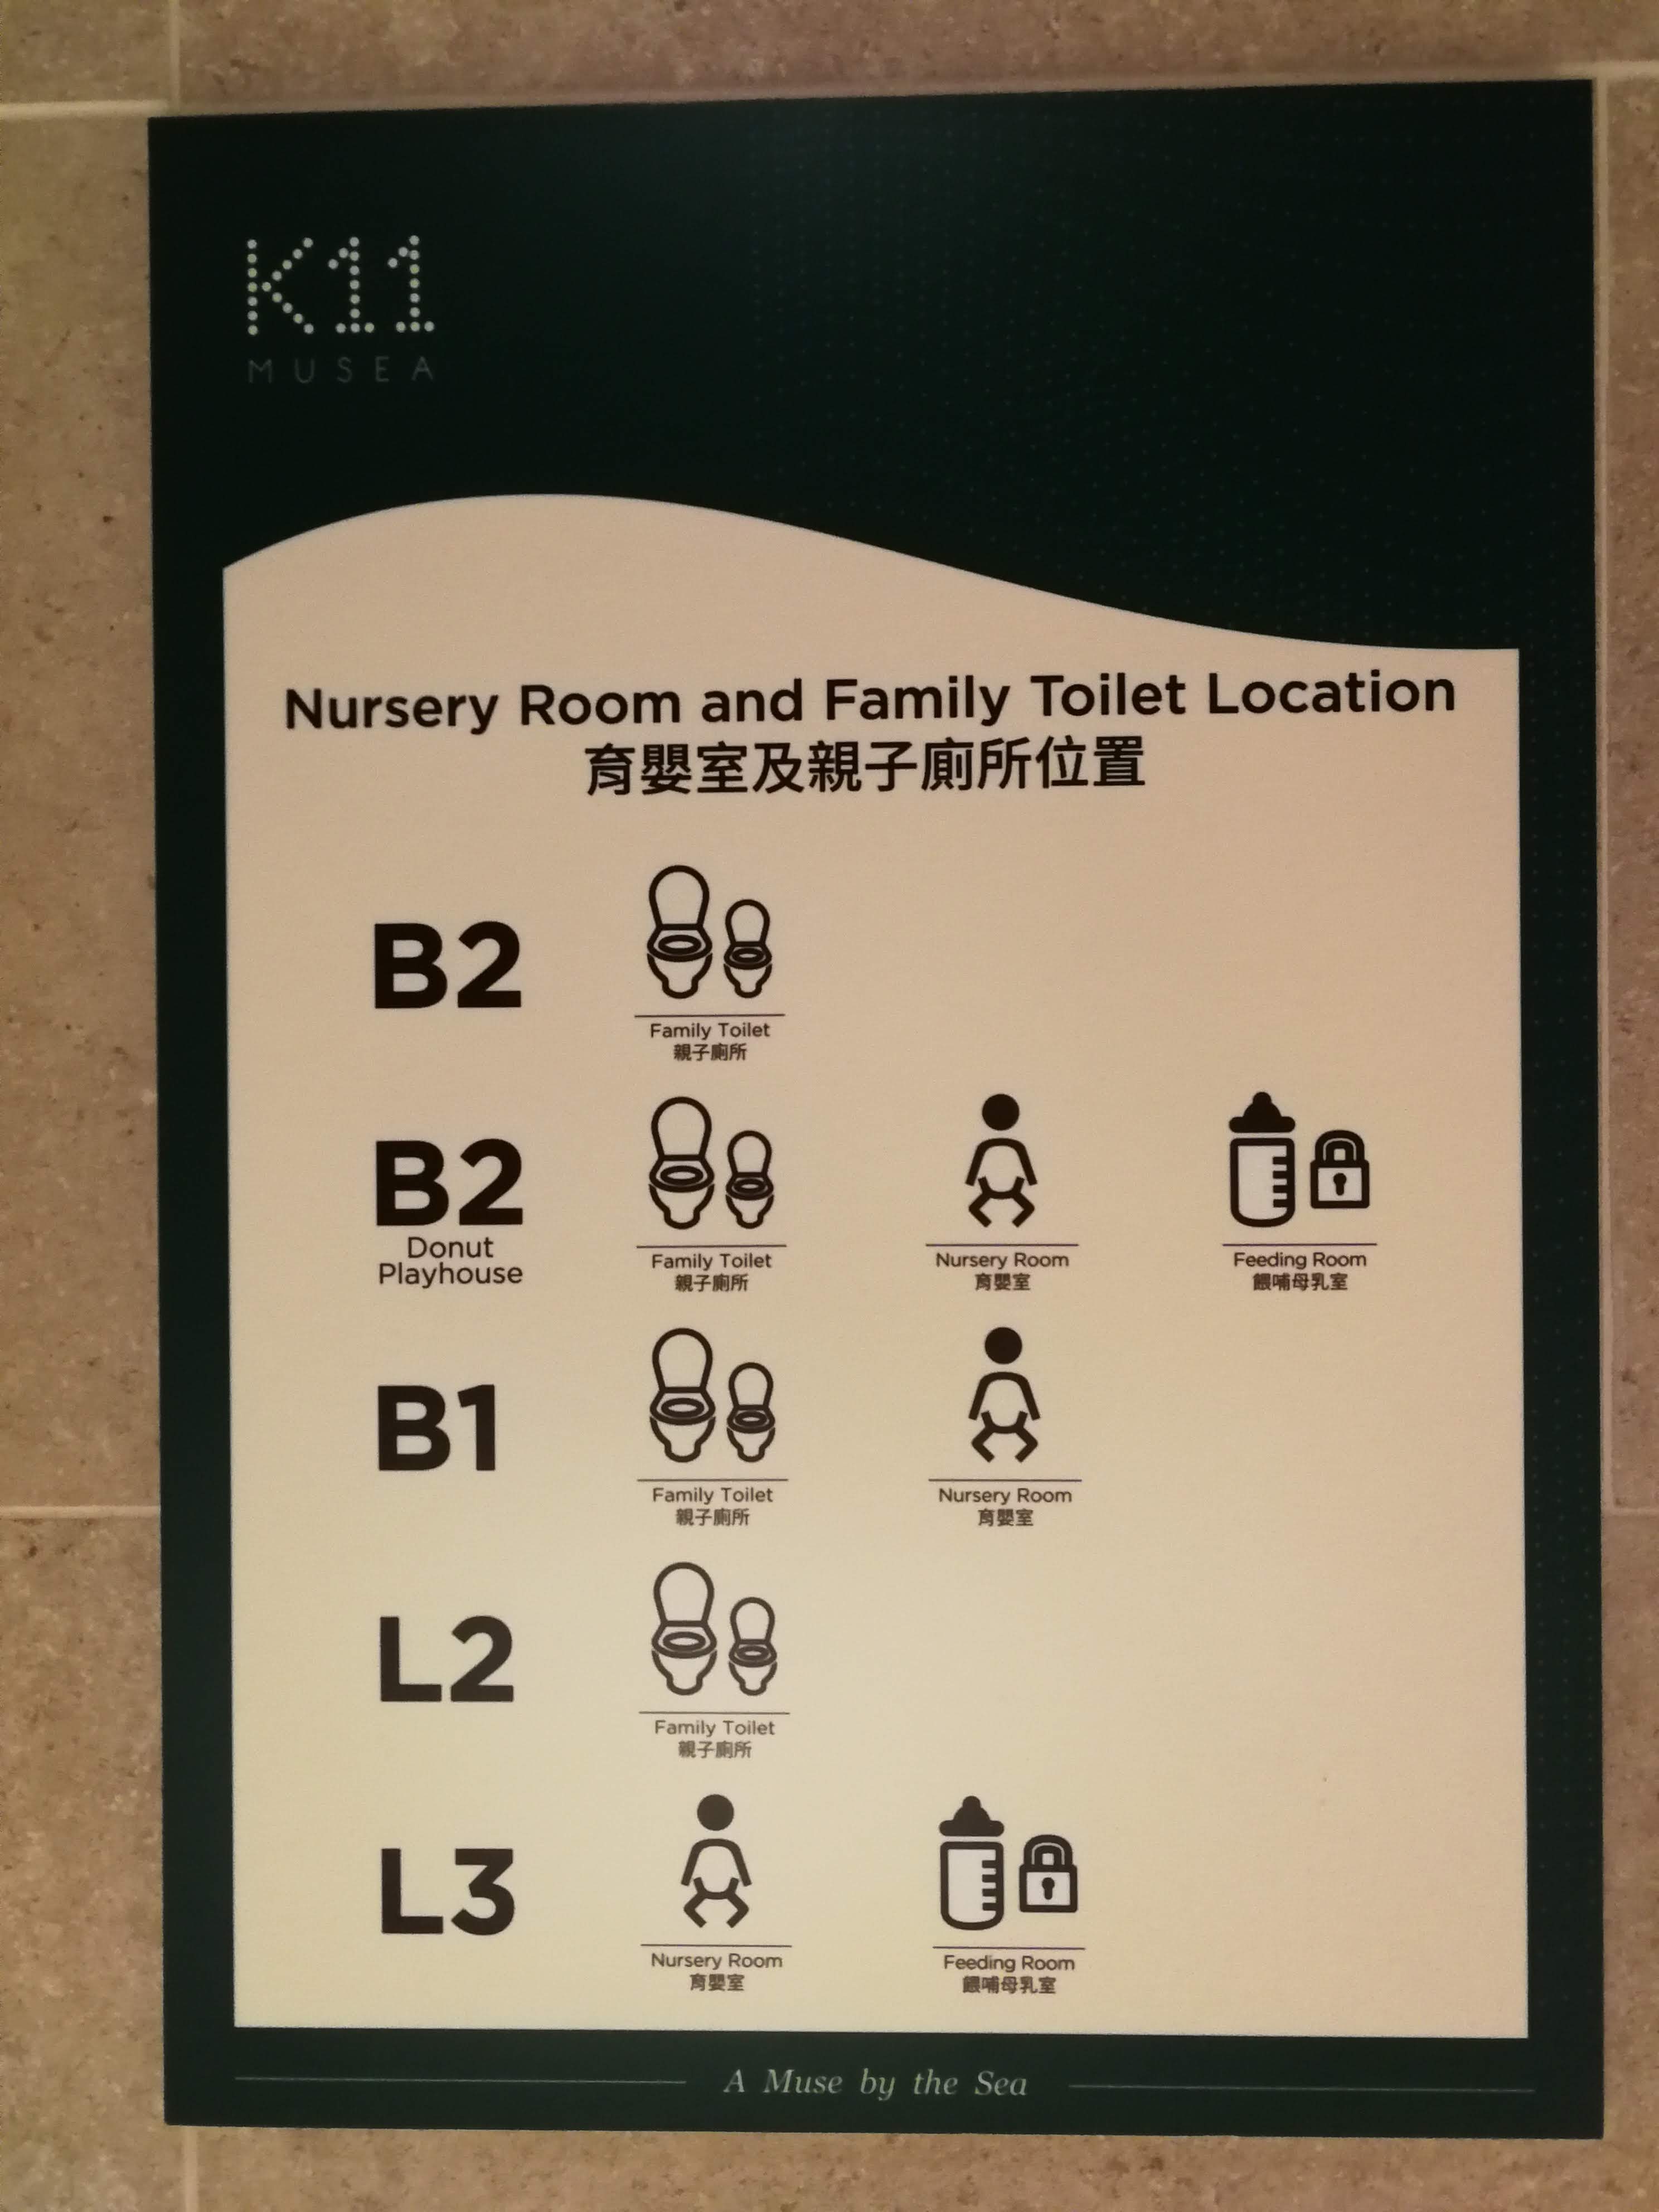 Signs for Nursing, Changing Room, and Family Restroom at K11 Musea